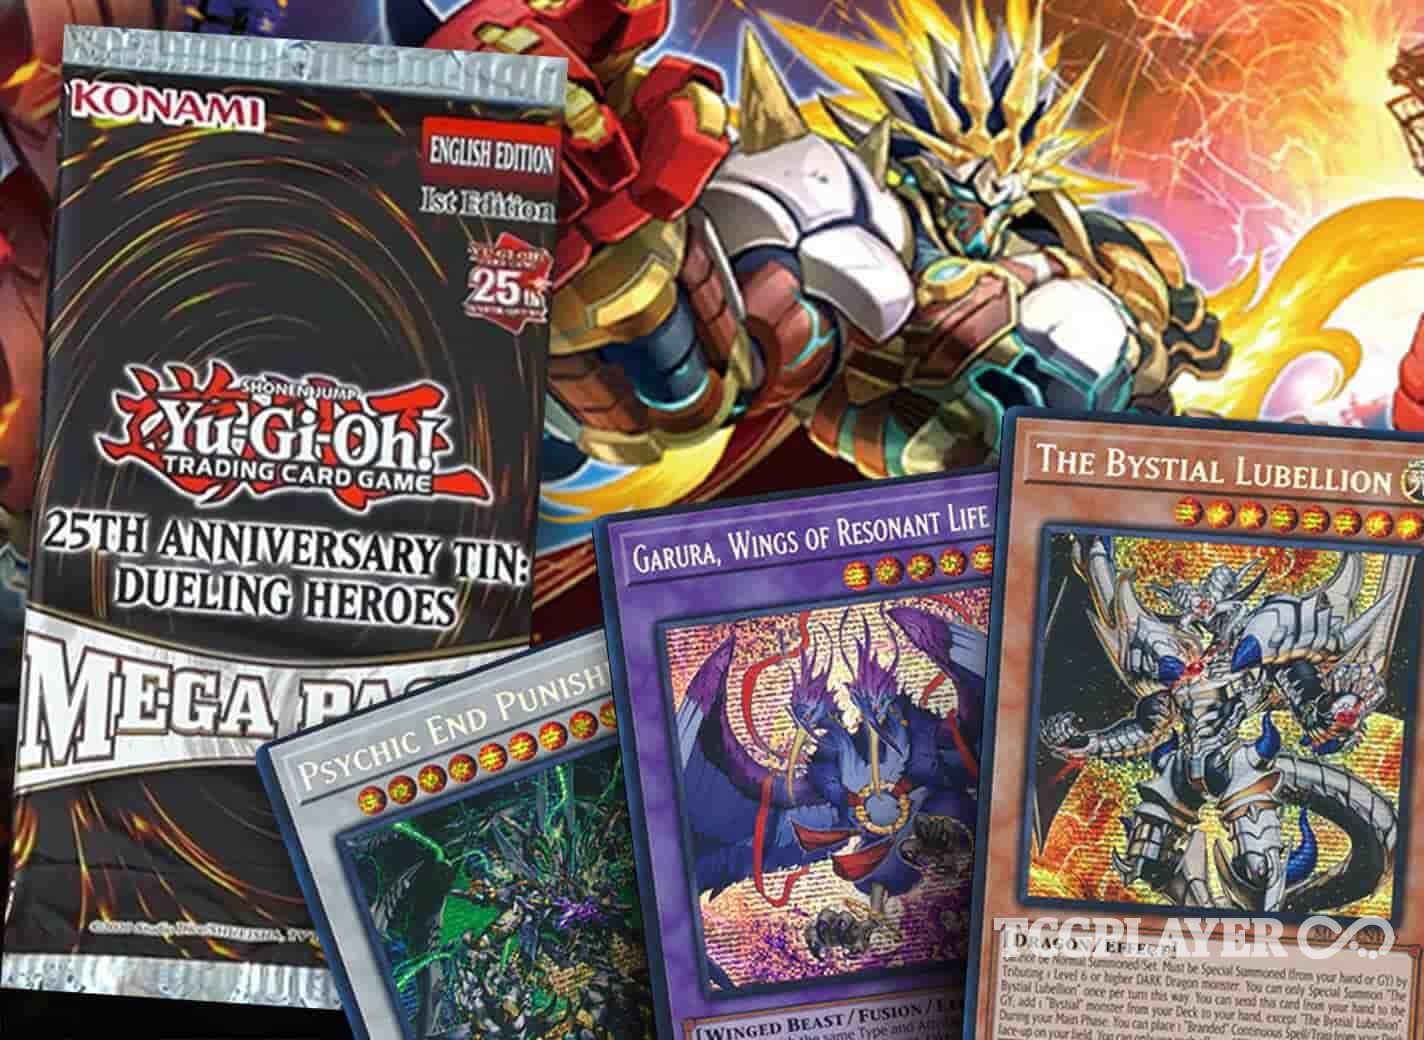 3000 people can win a version of fabled $2 million Yugioh card